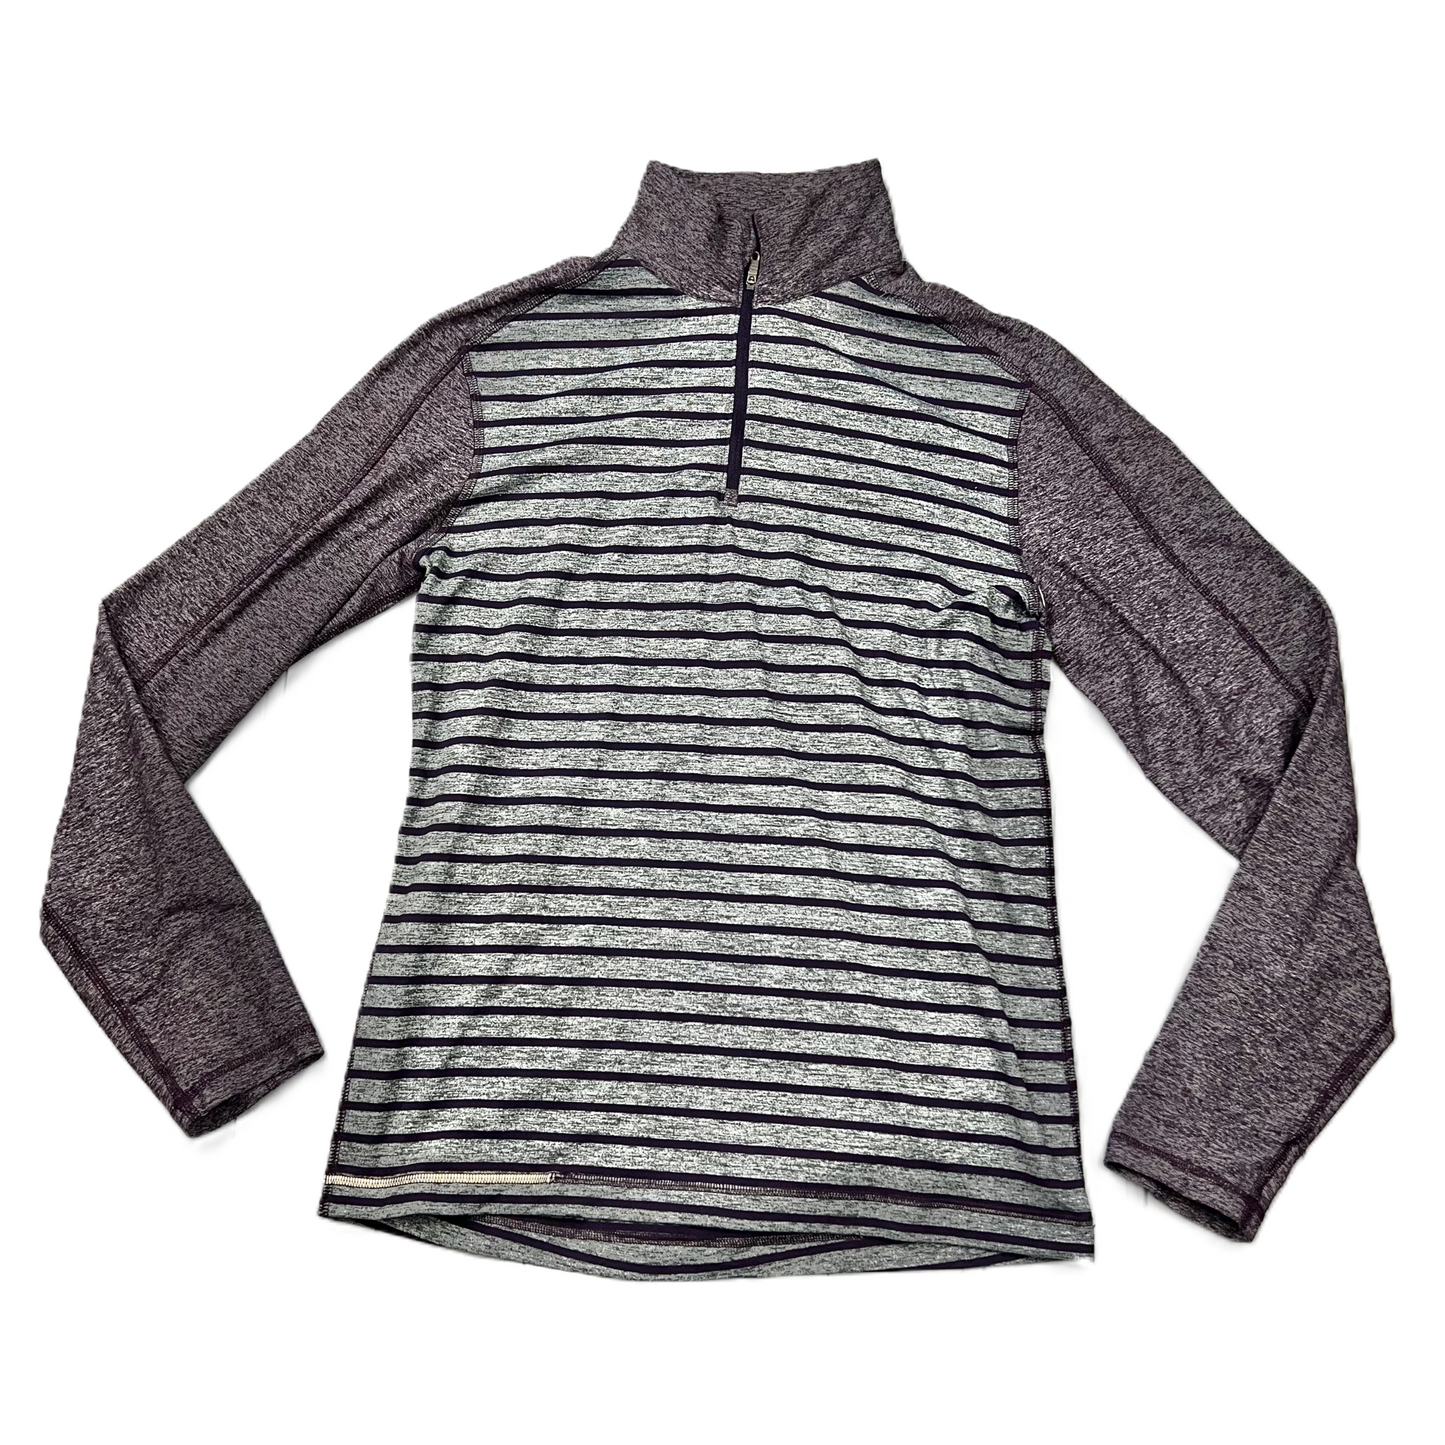 Striped Pattern Athletic Top Long Sleeve Collar By Lululemon, Size: M